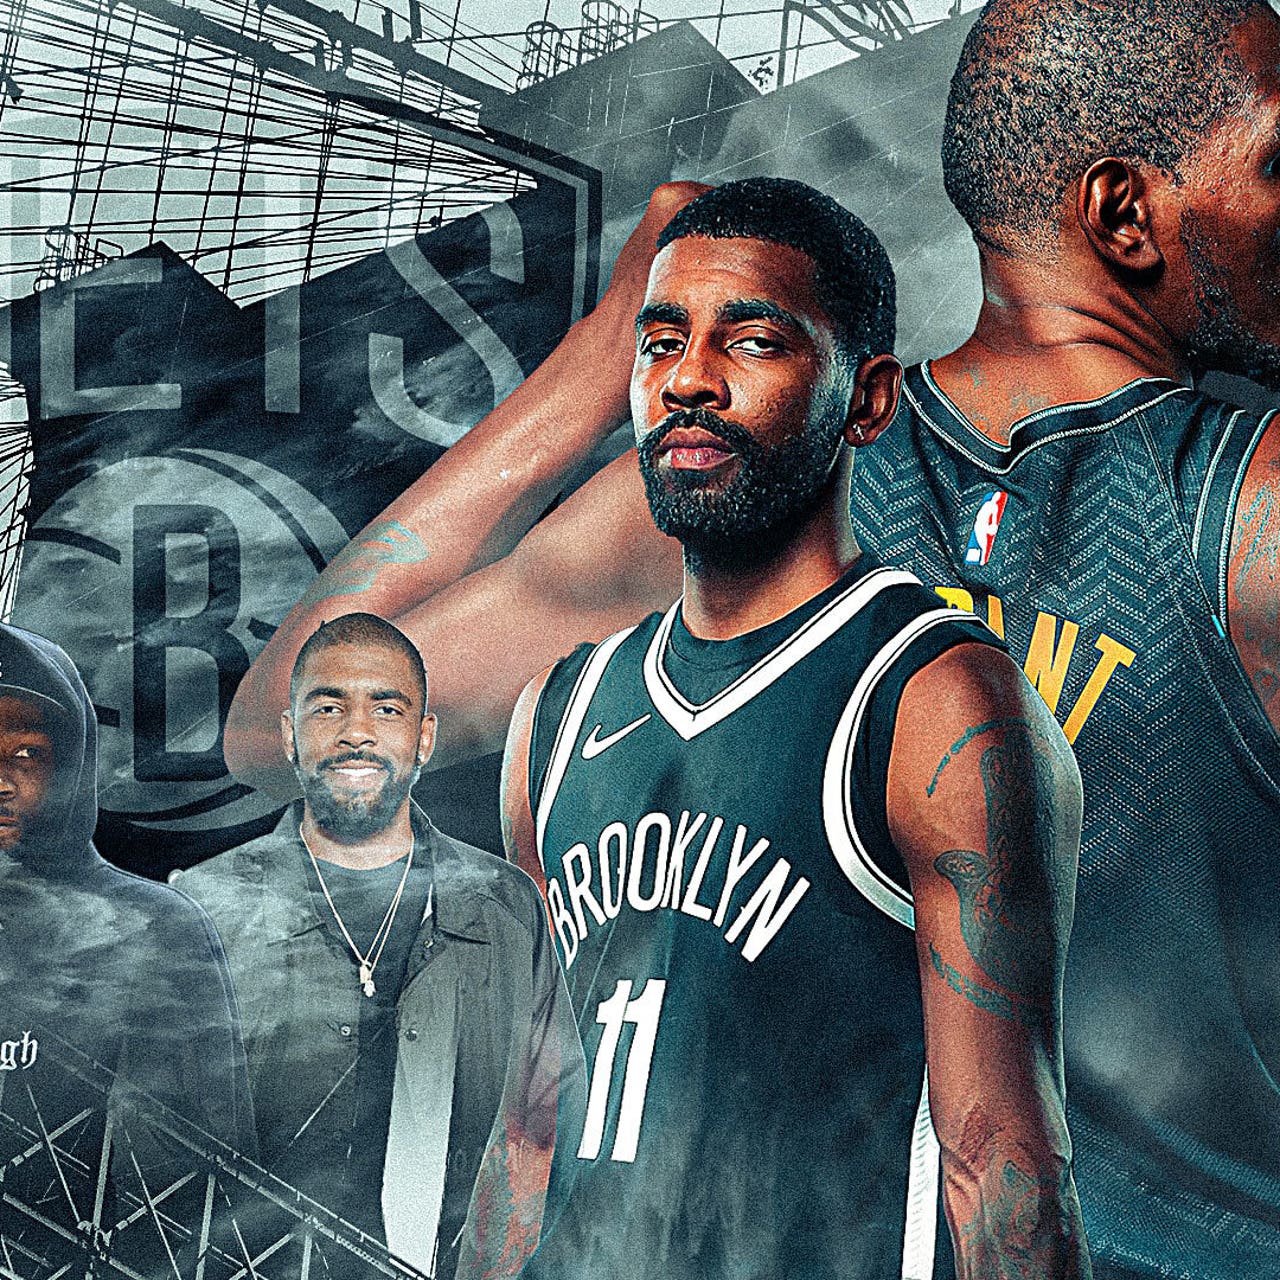 Kyrie Irving's Instagram Profile Wants To Help You Expand Your Mind